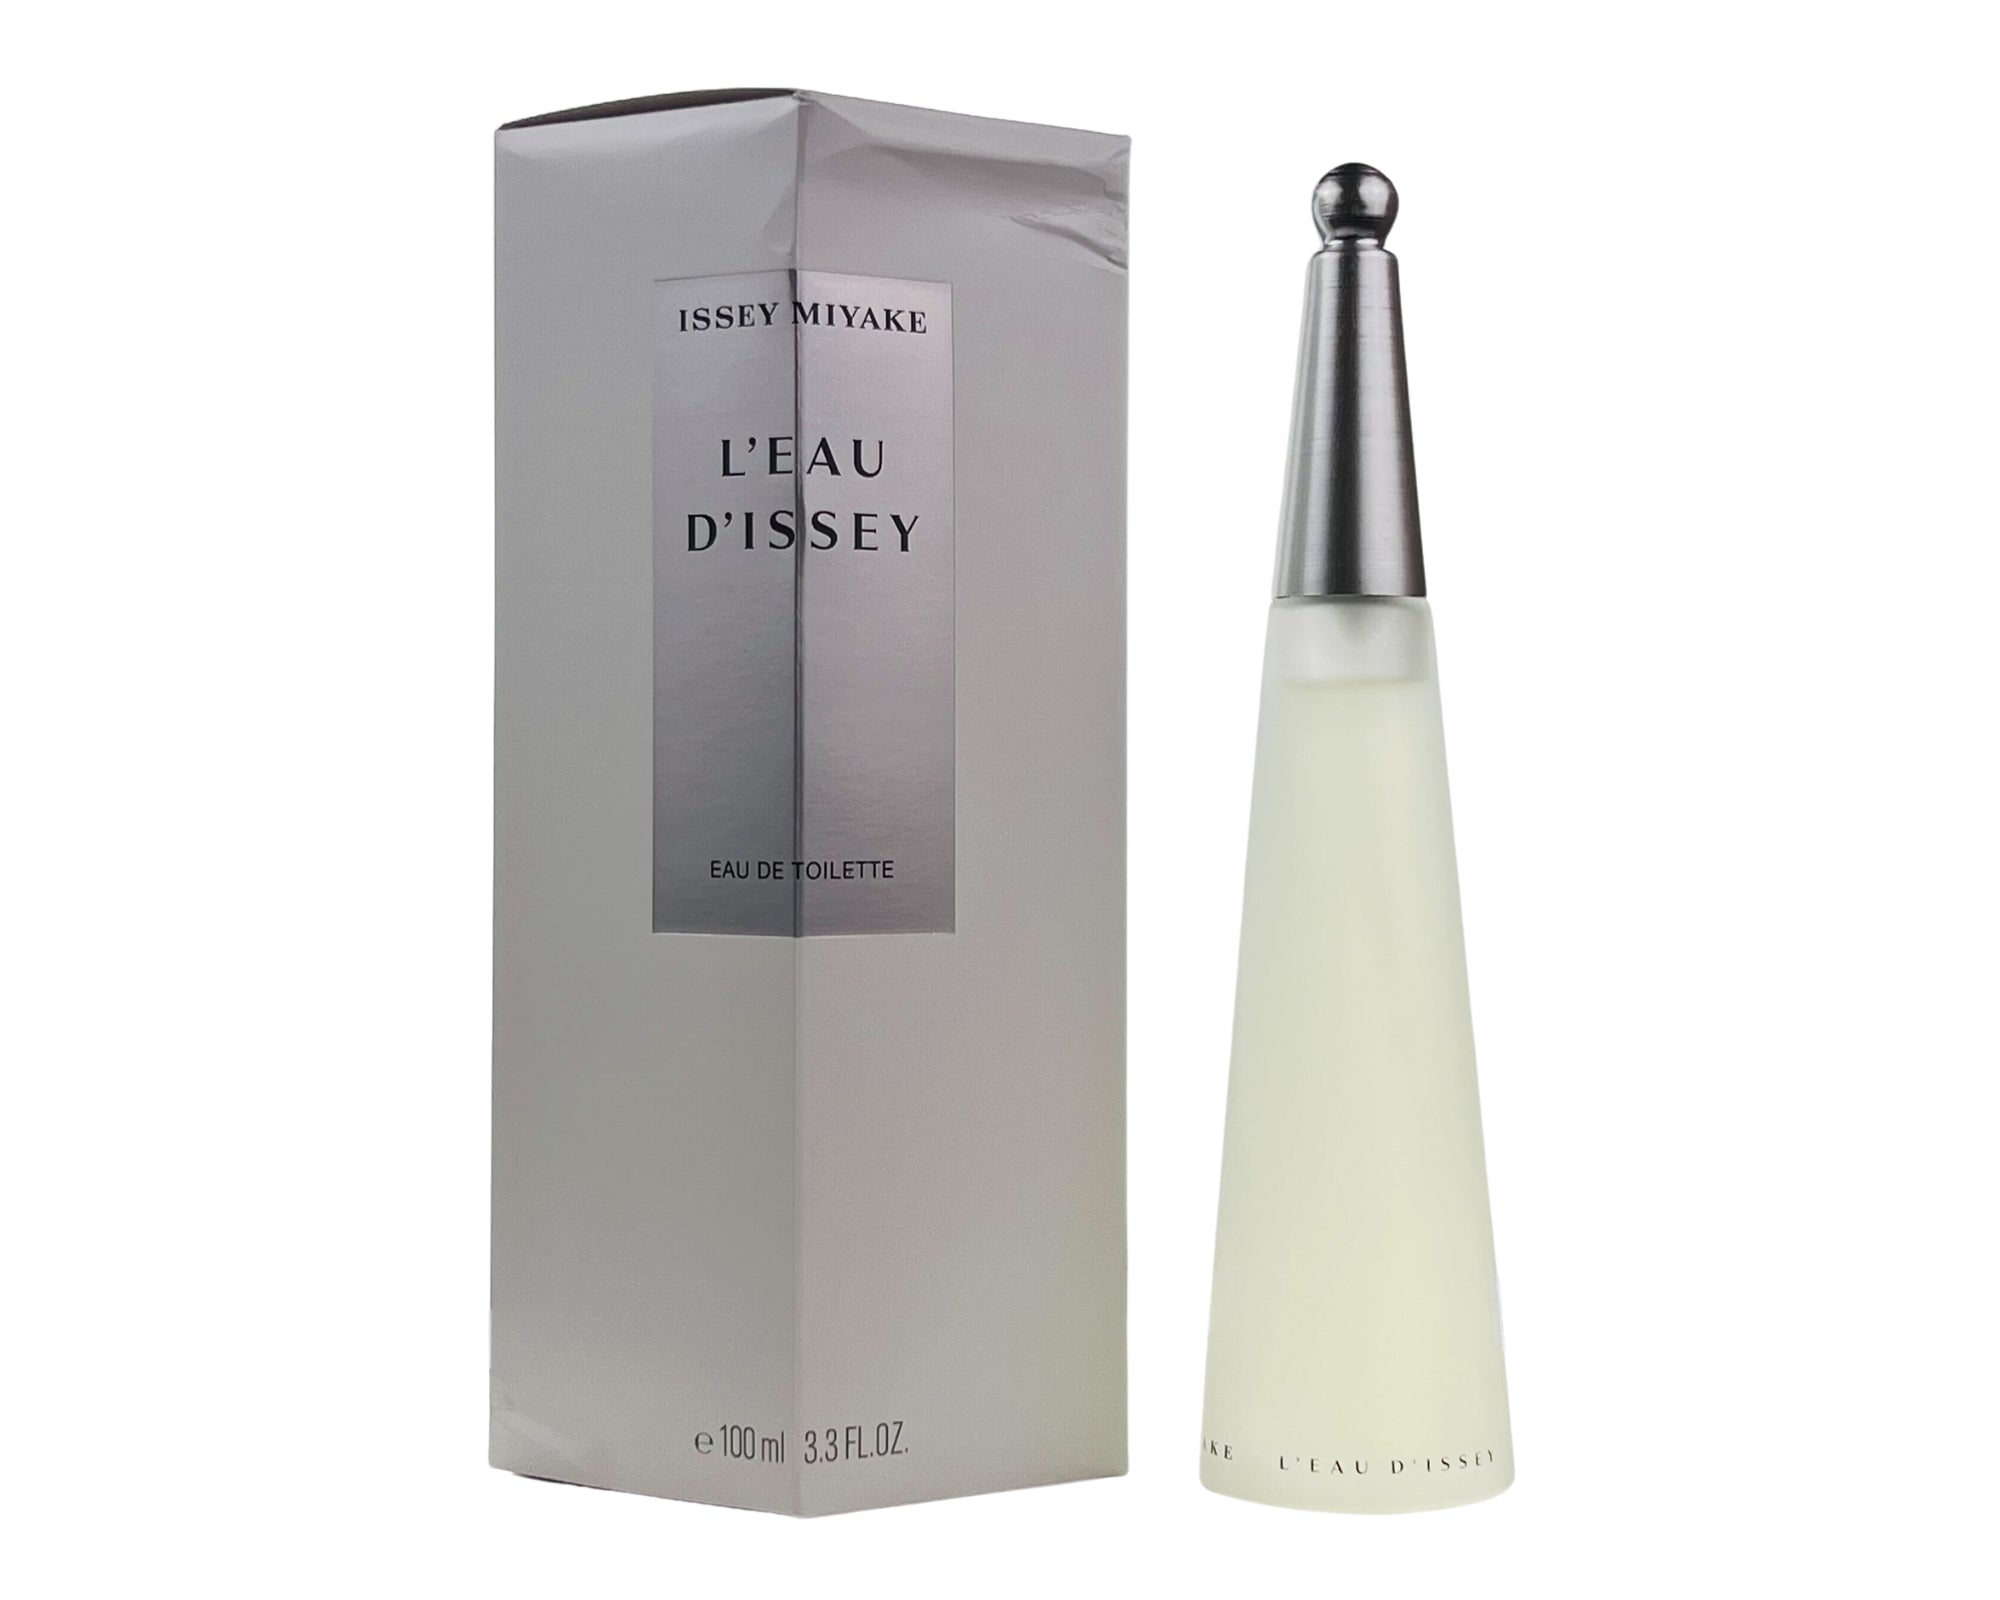 L'eau D'issey (issey Miyake) Cologne by Issey Miyake